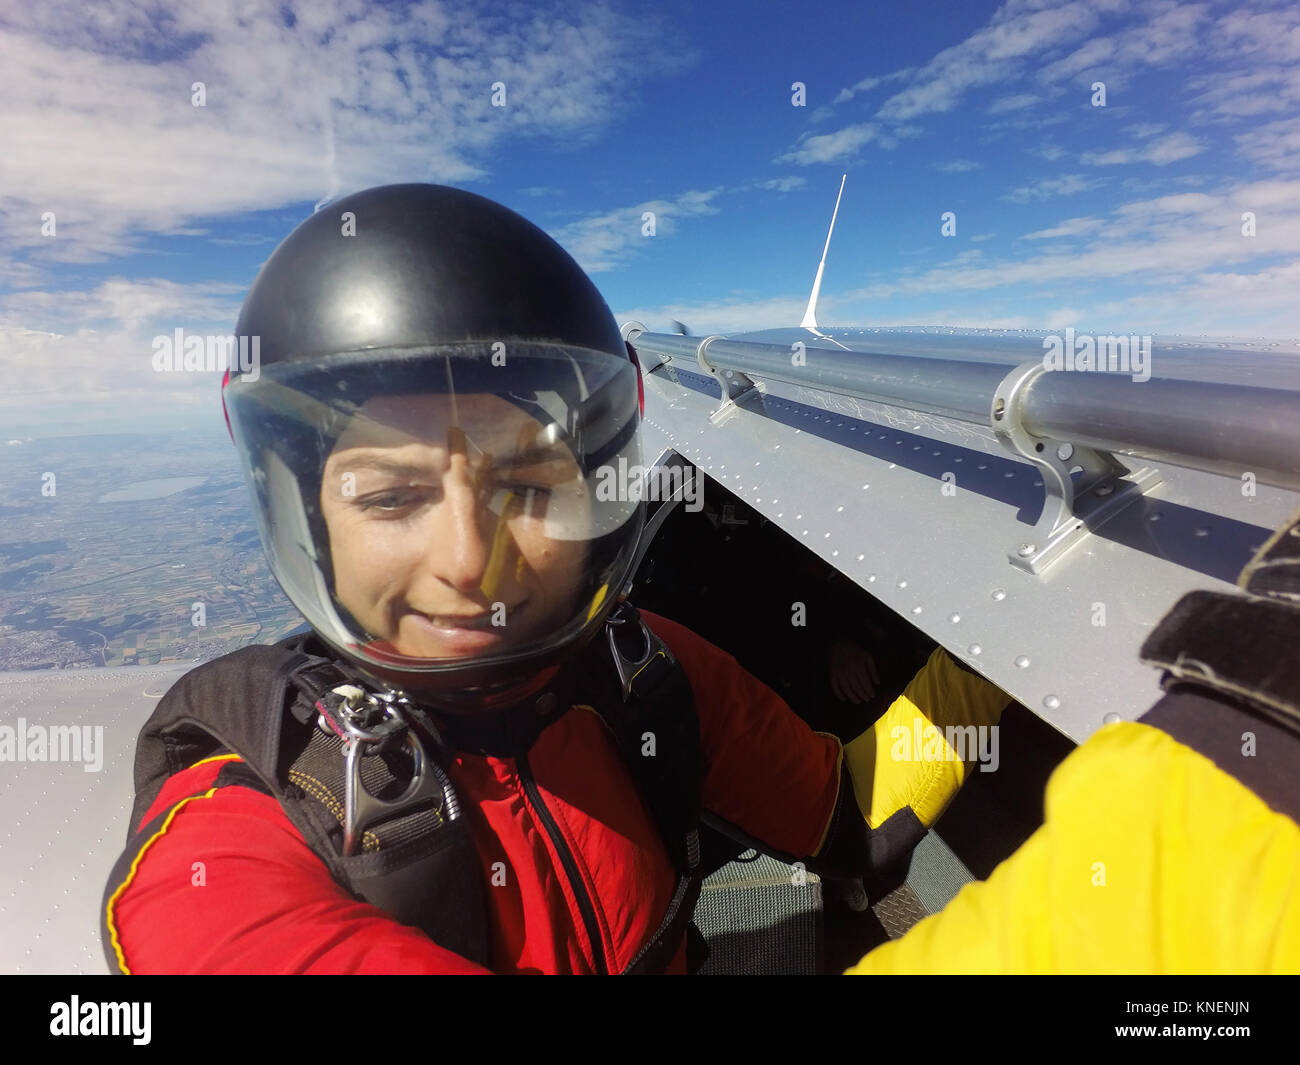 Portrait of female skydiver preparing to jump from aircraft Stock Photo